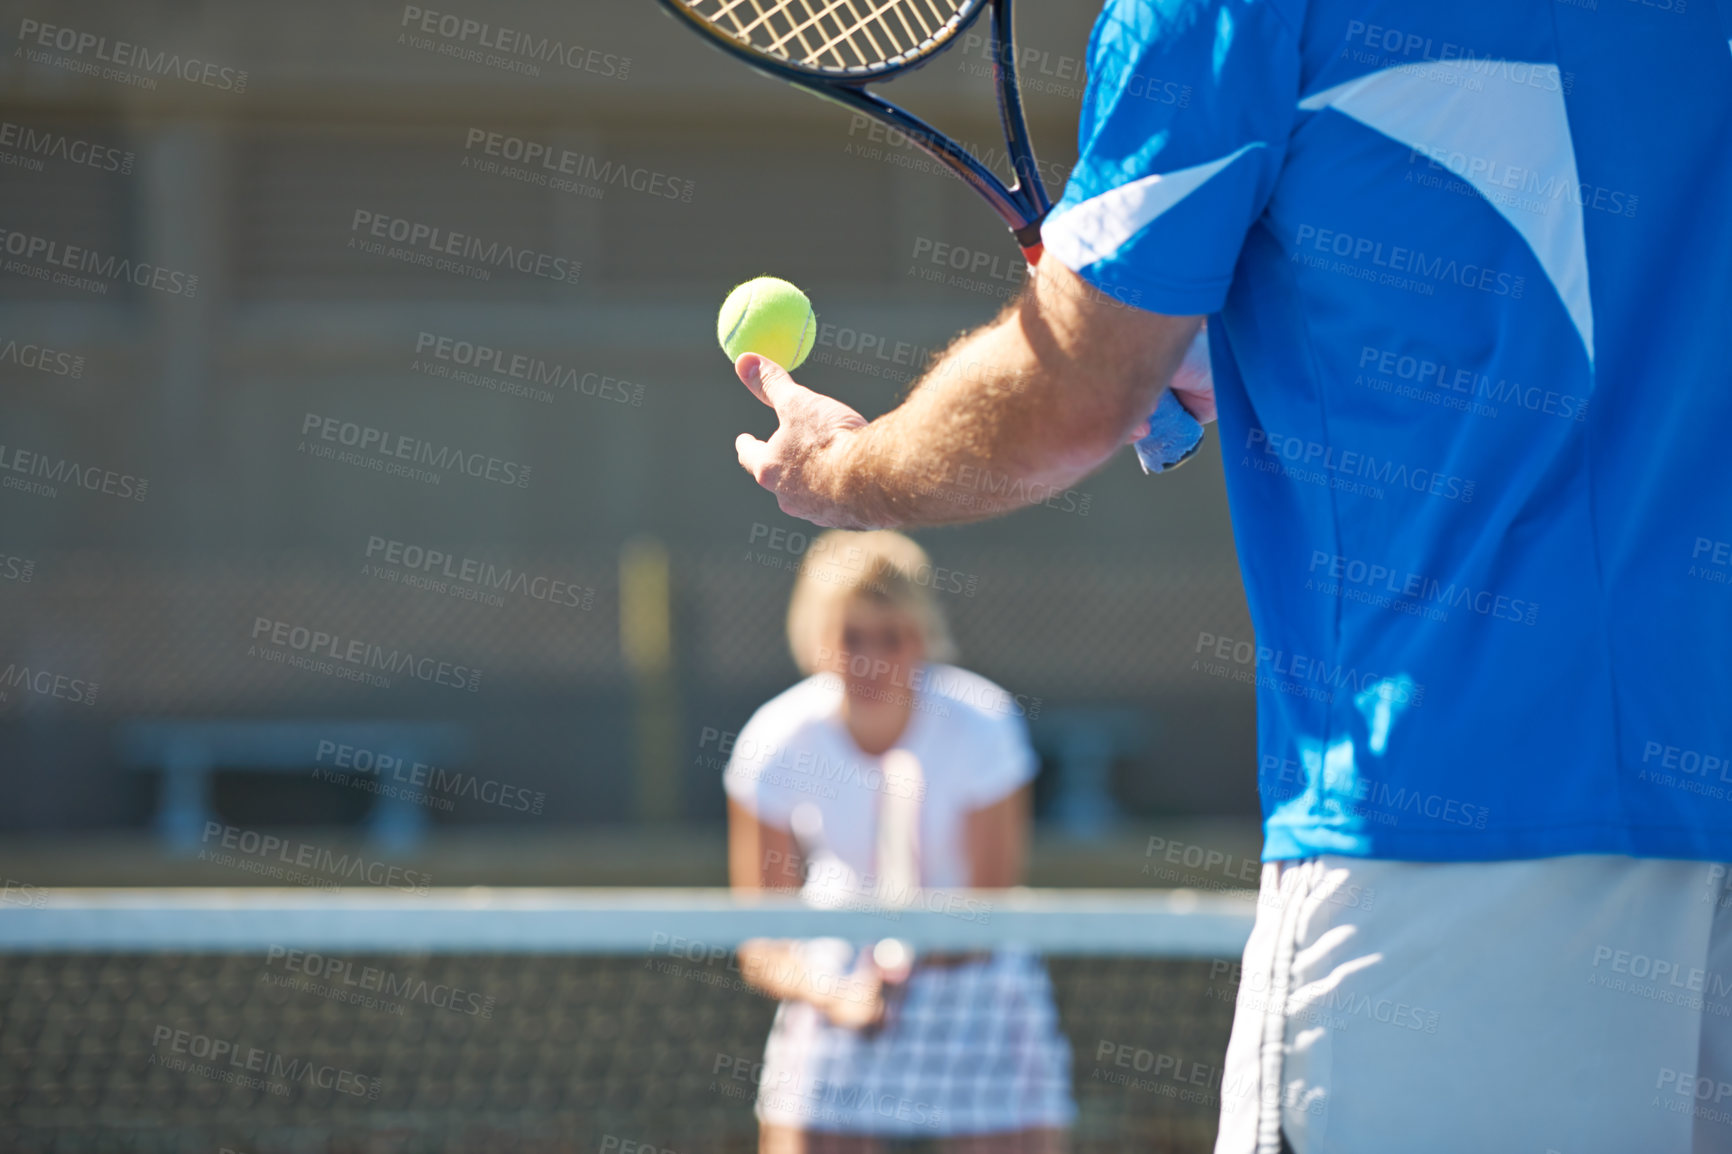 Buy stock photo Cropped image of a man bouncing a tennis ball in his hand before a service